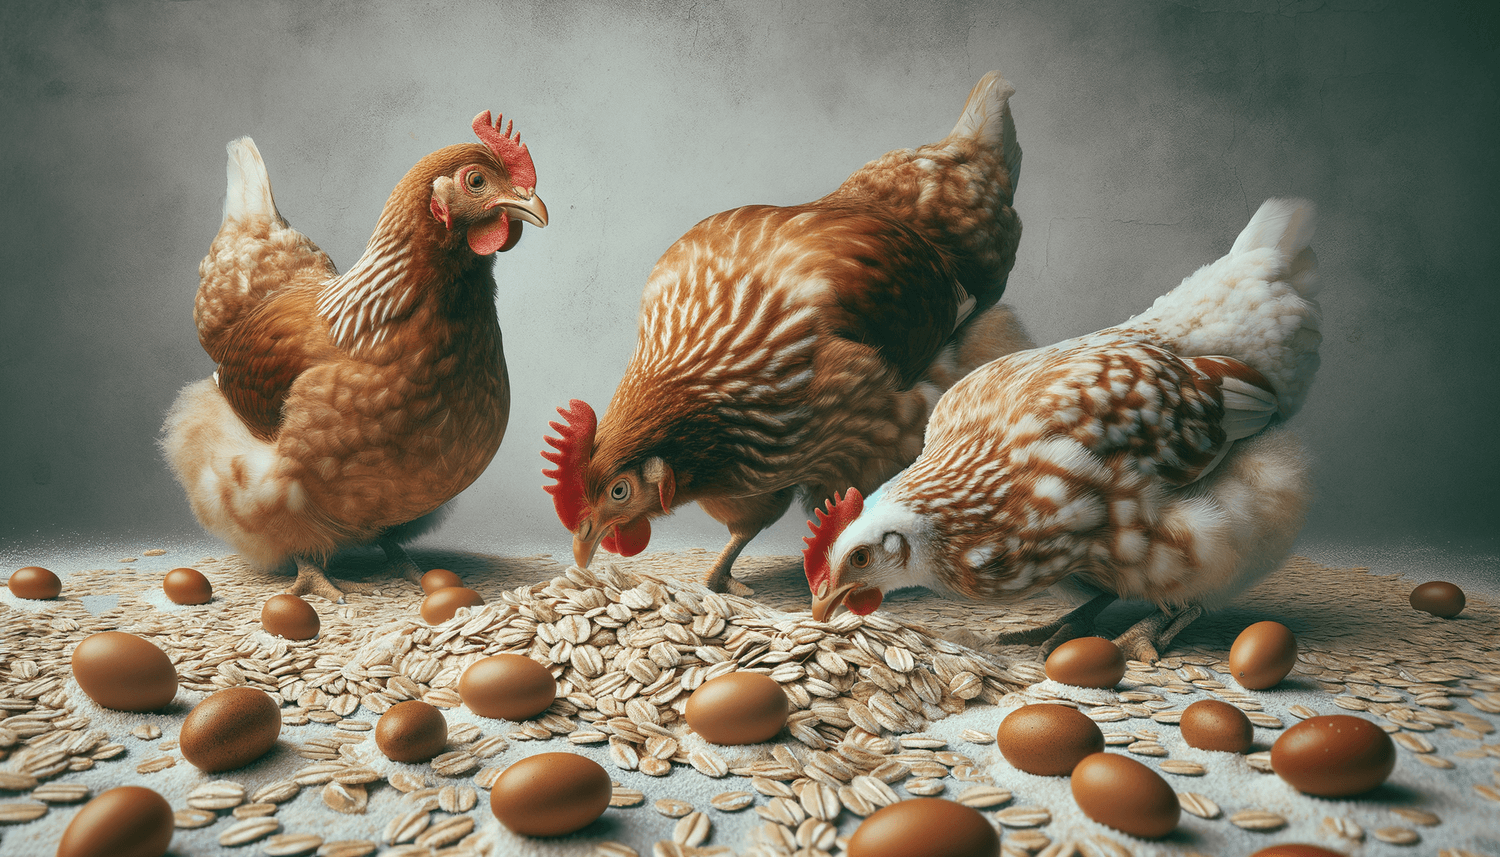 Can Chickens Eat Uncooked Oats?